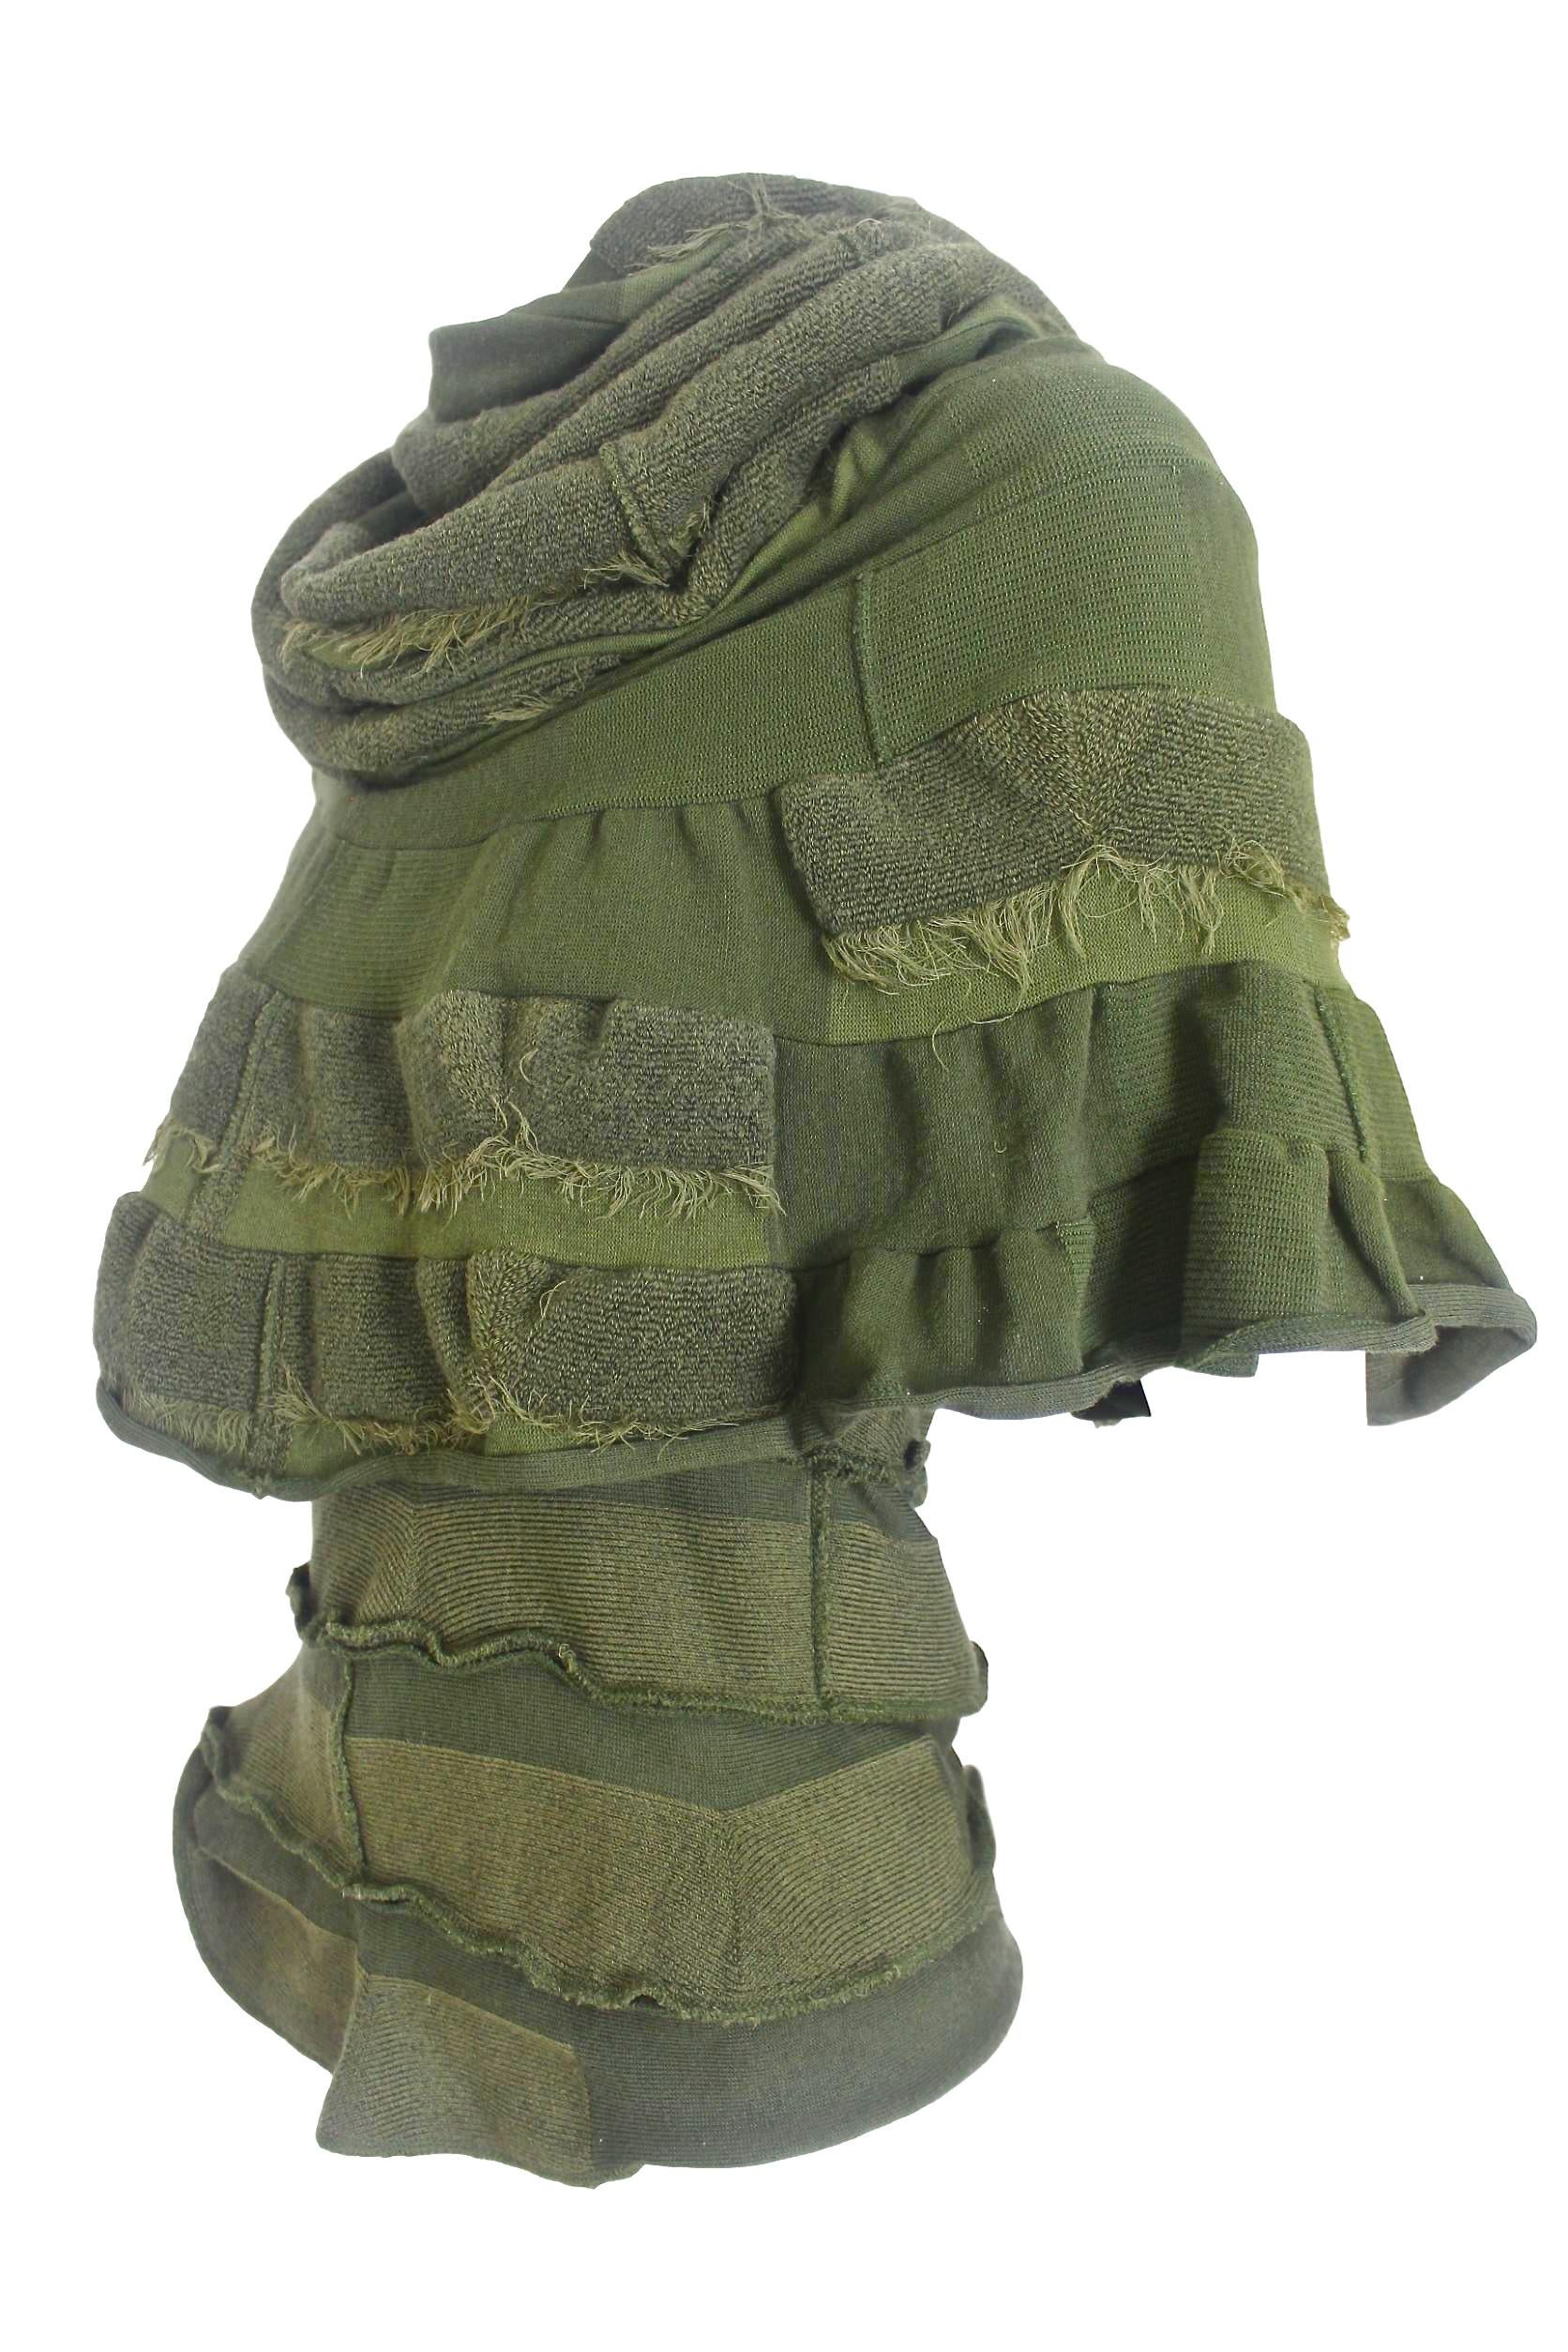 Comme des Garçons Junya Watanabe 2006 Collection Military Knitted Poncho 10